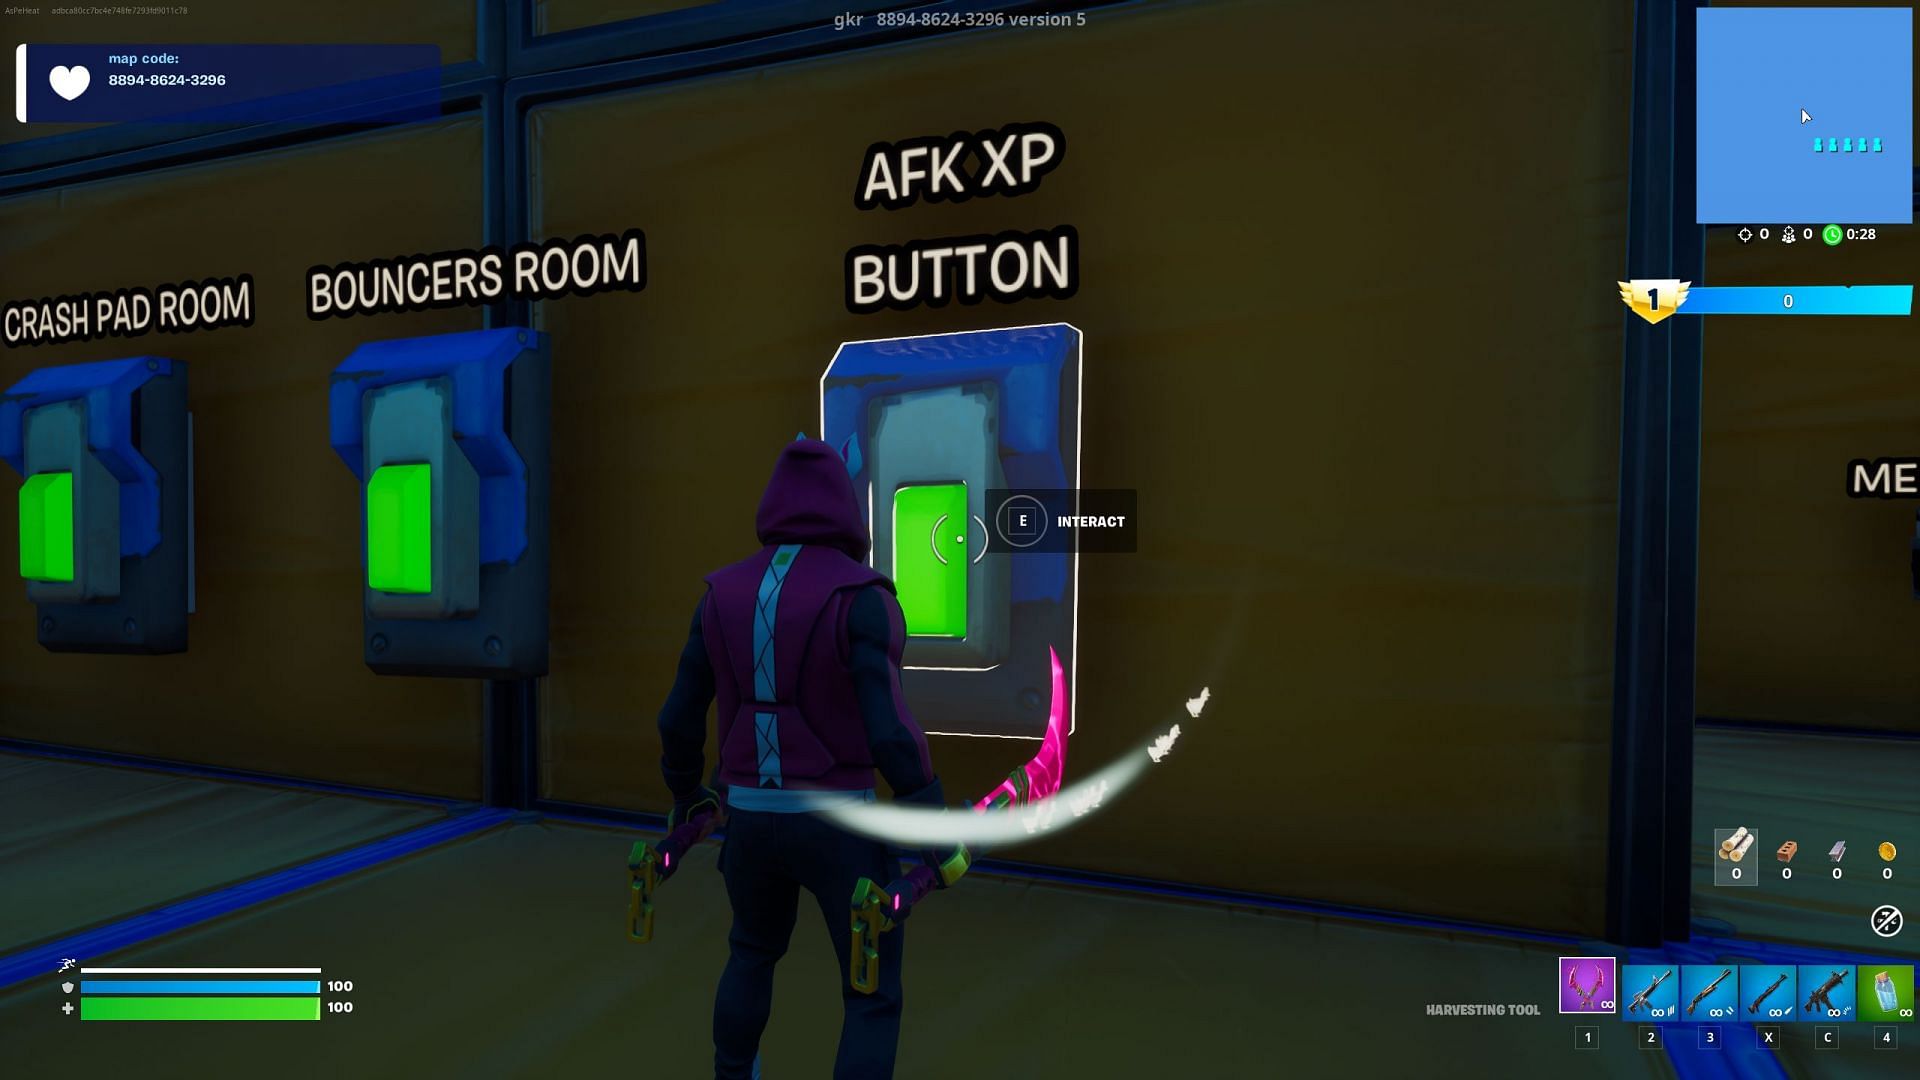 To begin earning XP, interact with the AFK XP button (Image via Epic Games)